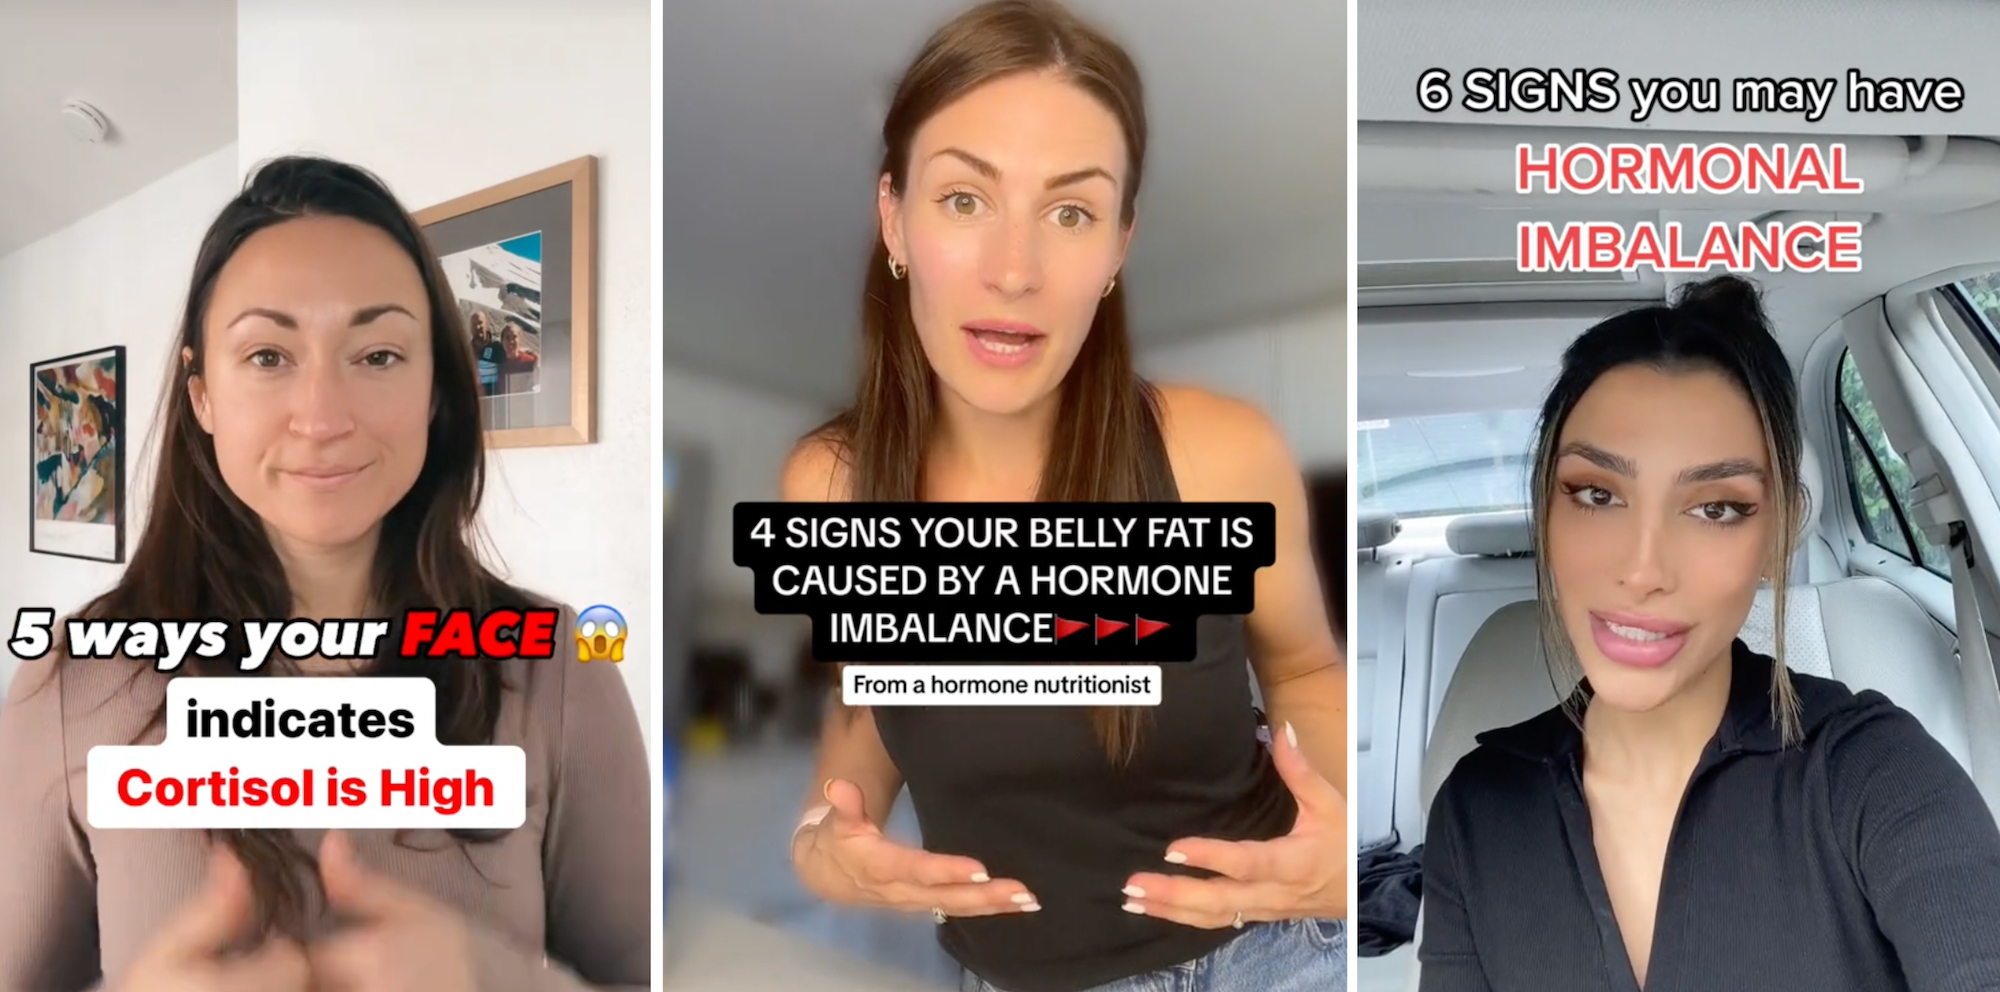 A trio of TikTok screenshots: "5 ways your FACE indicates Cortisol is High"; "4 SSIGNS YOUR BELLY FAT IS CAUSED BY A HORMONE IMBALANCE From a hormone nutritionist"; 6 SIGNS you may have HORMONAL IMBALANCE"